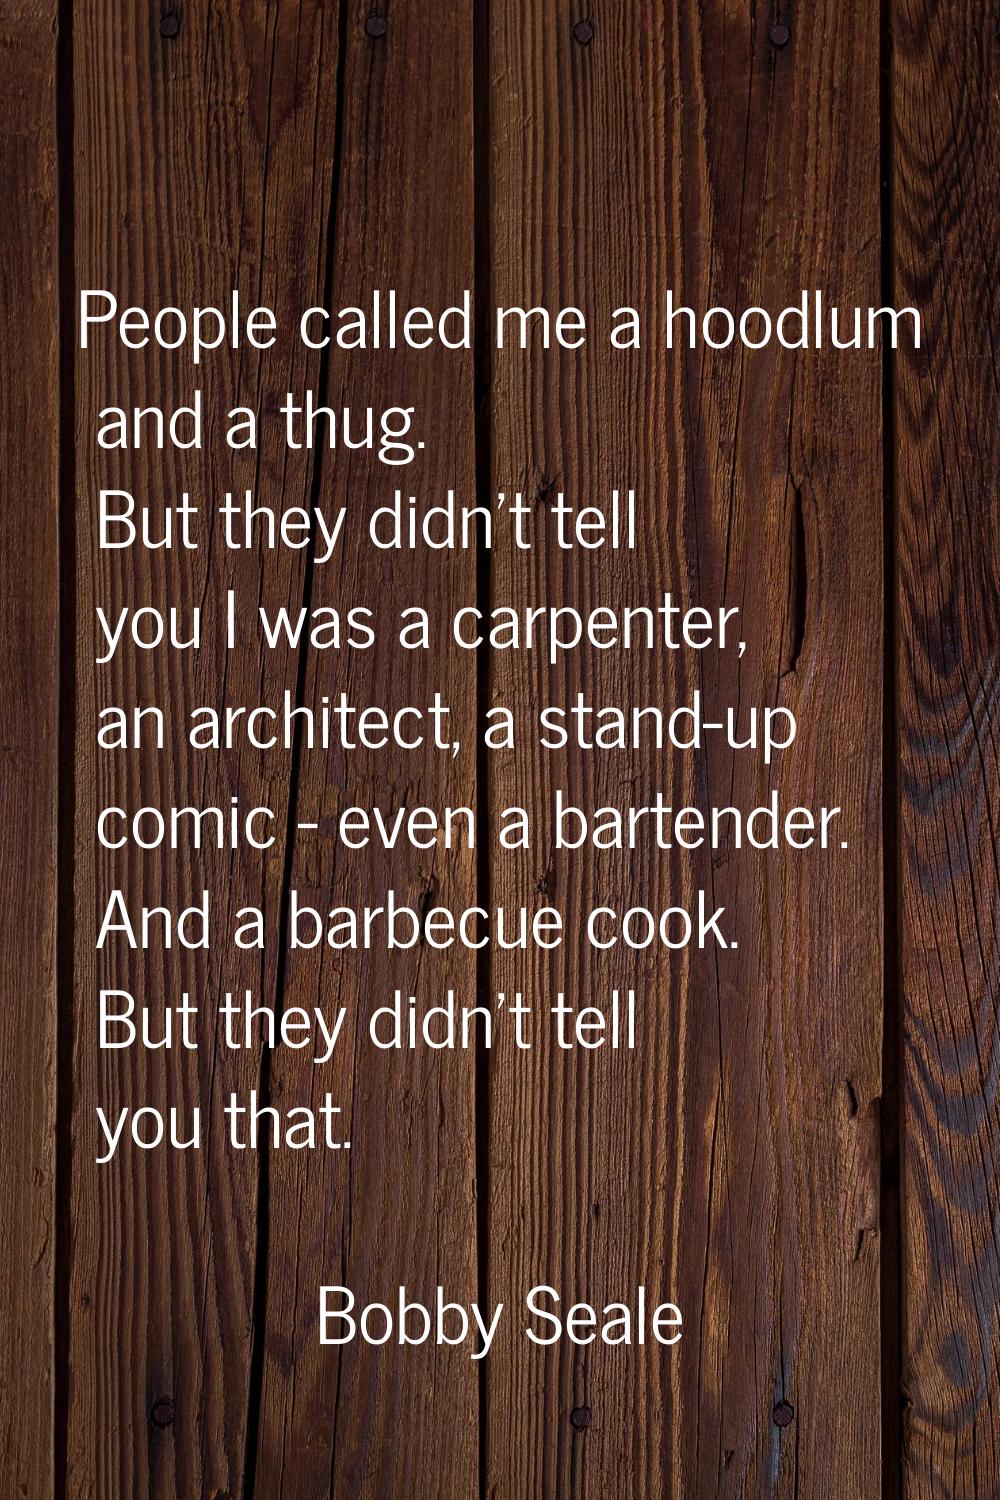 People called me a hoodlum and a thug. But they didn't tell you I was a carpenter, an architect, a 